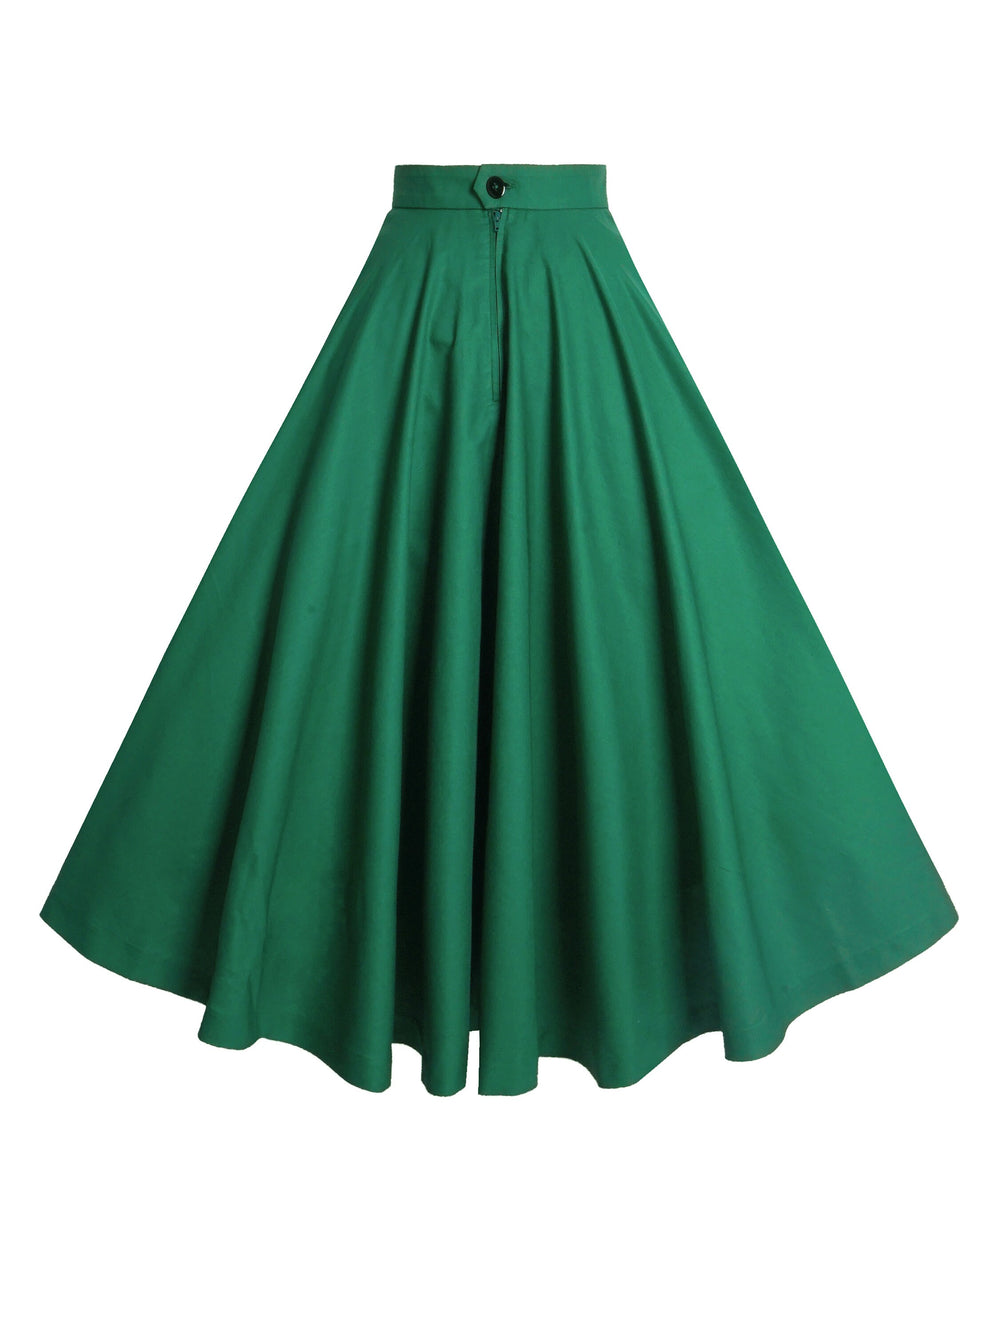 RTS - Size XL - Lindy Skirt in Pine Green Cotton